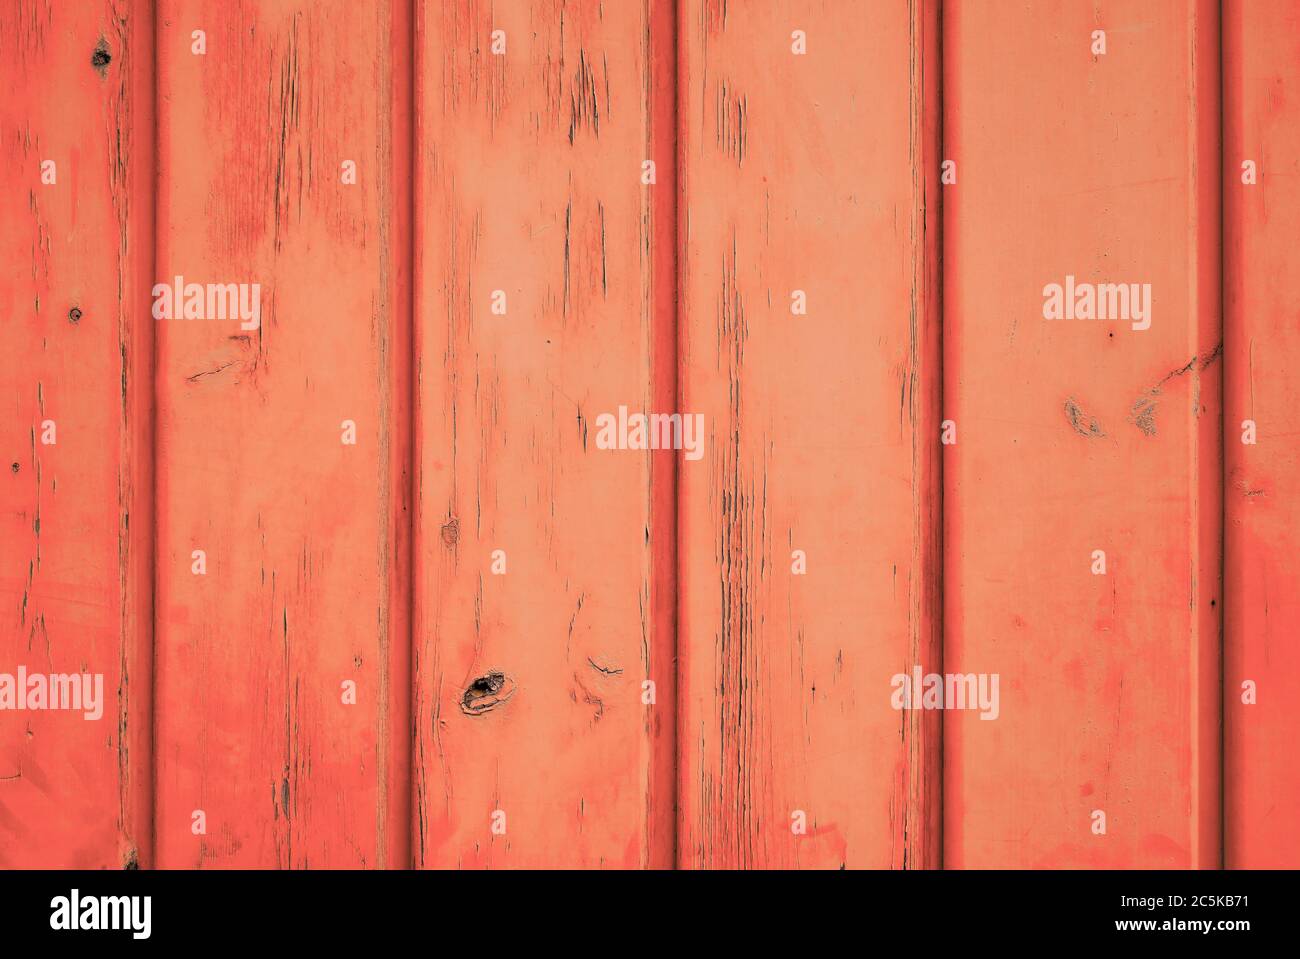 Cheerful colour background of orange weathered wood with vertical planks. Stock Photo